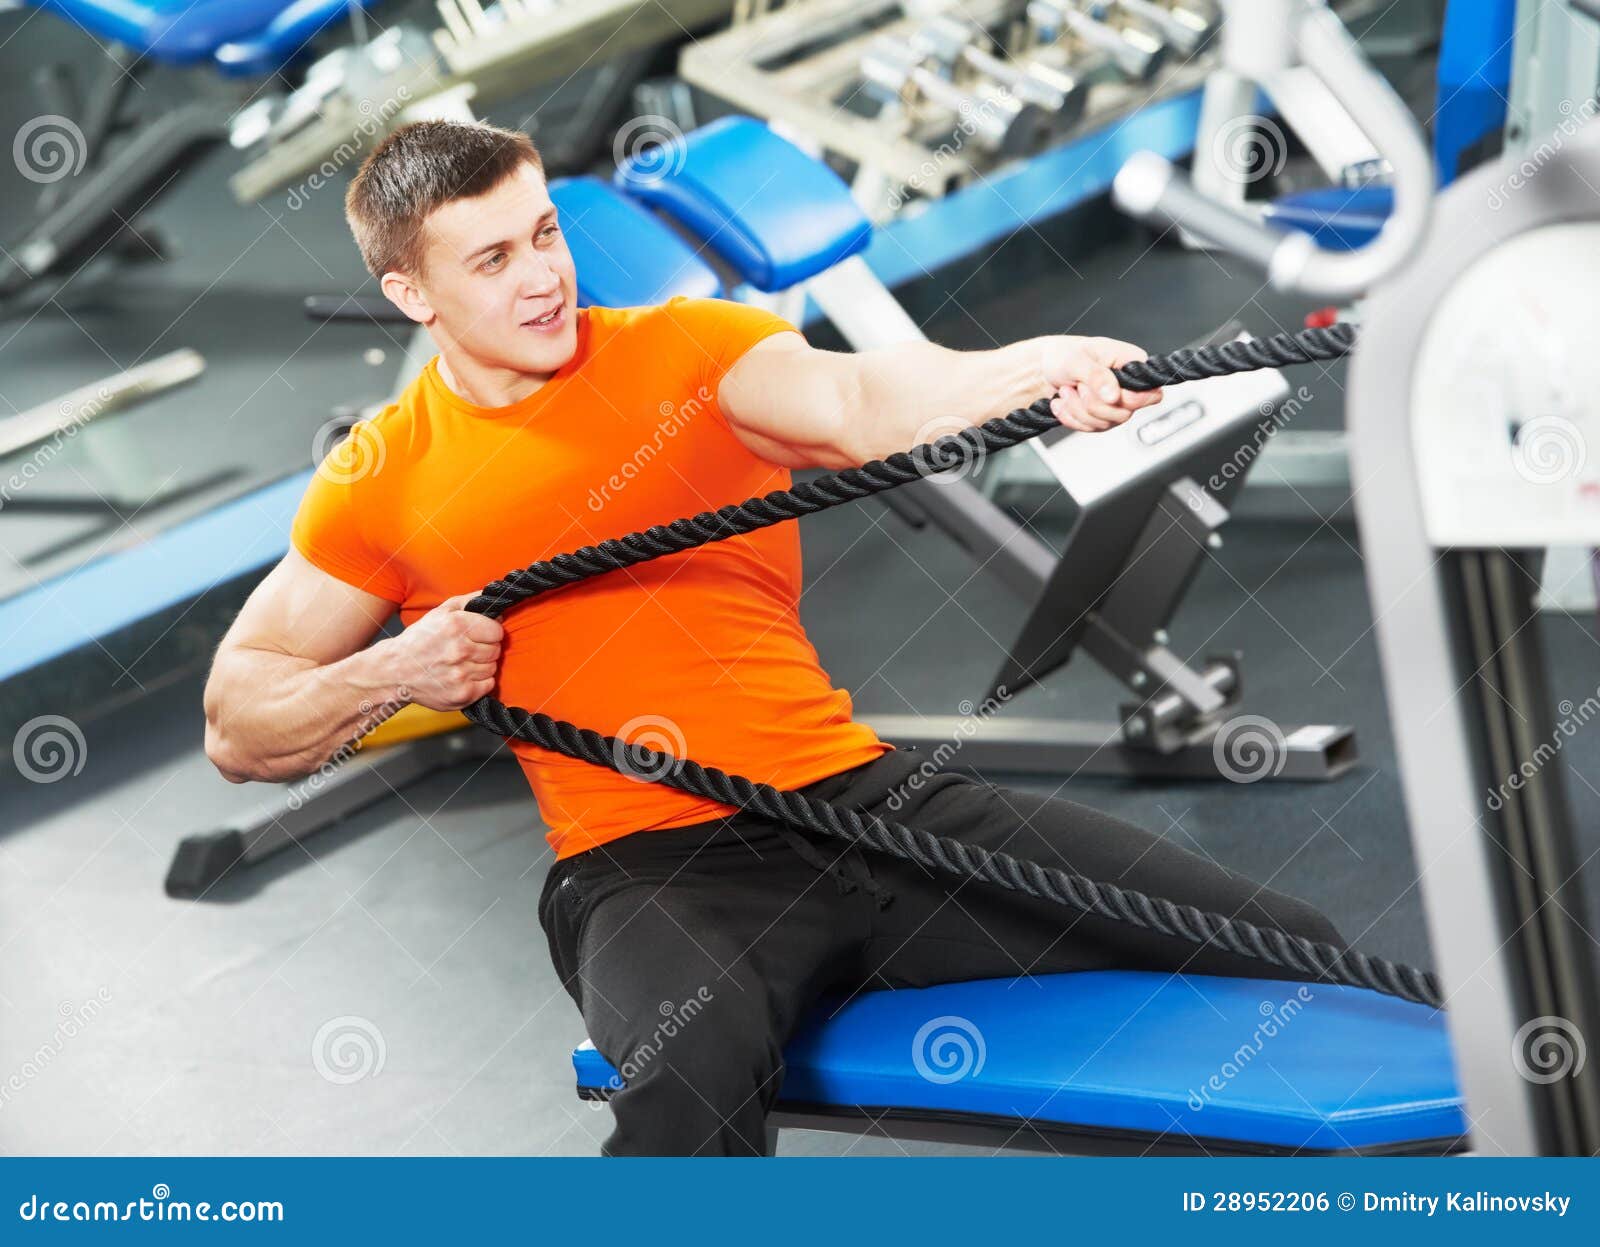 Chest Workout With Cables - Stock Image - Everypixel